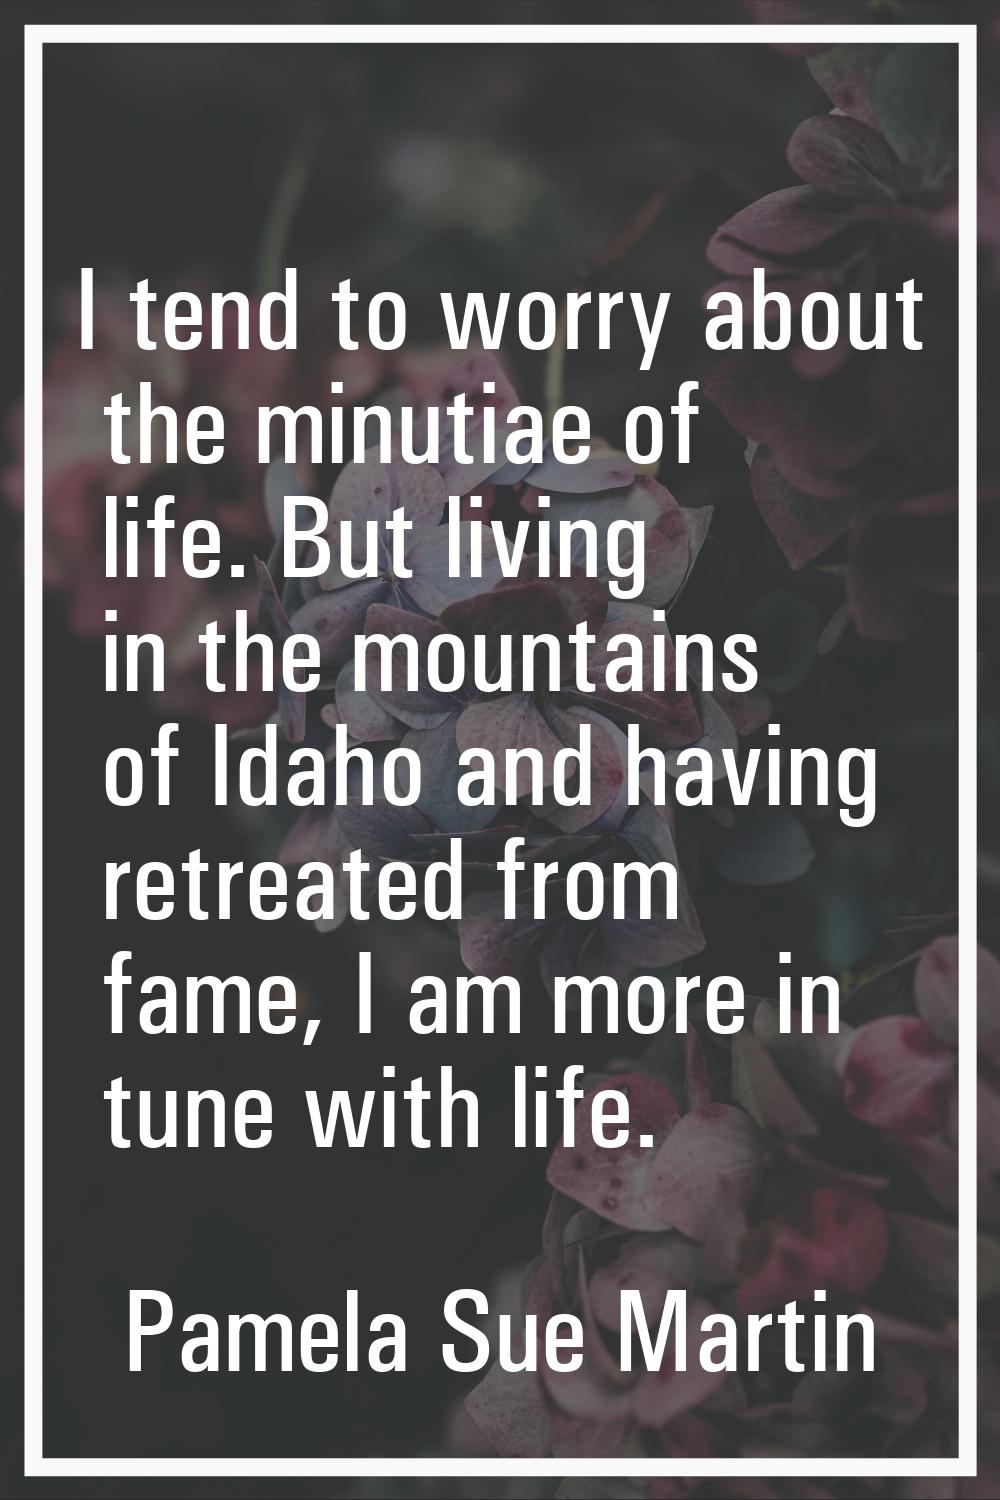 I tend to worry about the minutiae of life. But living in the mountains of Idaho and having retreat